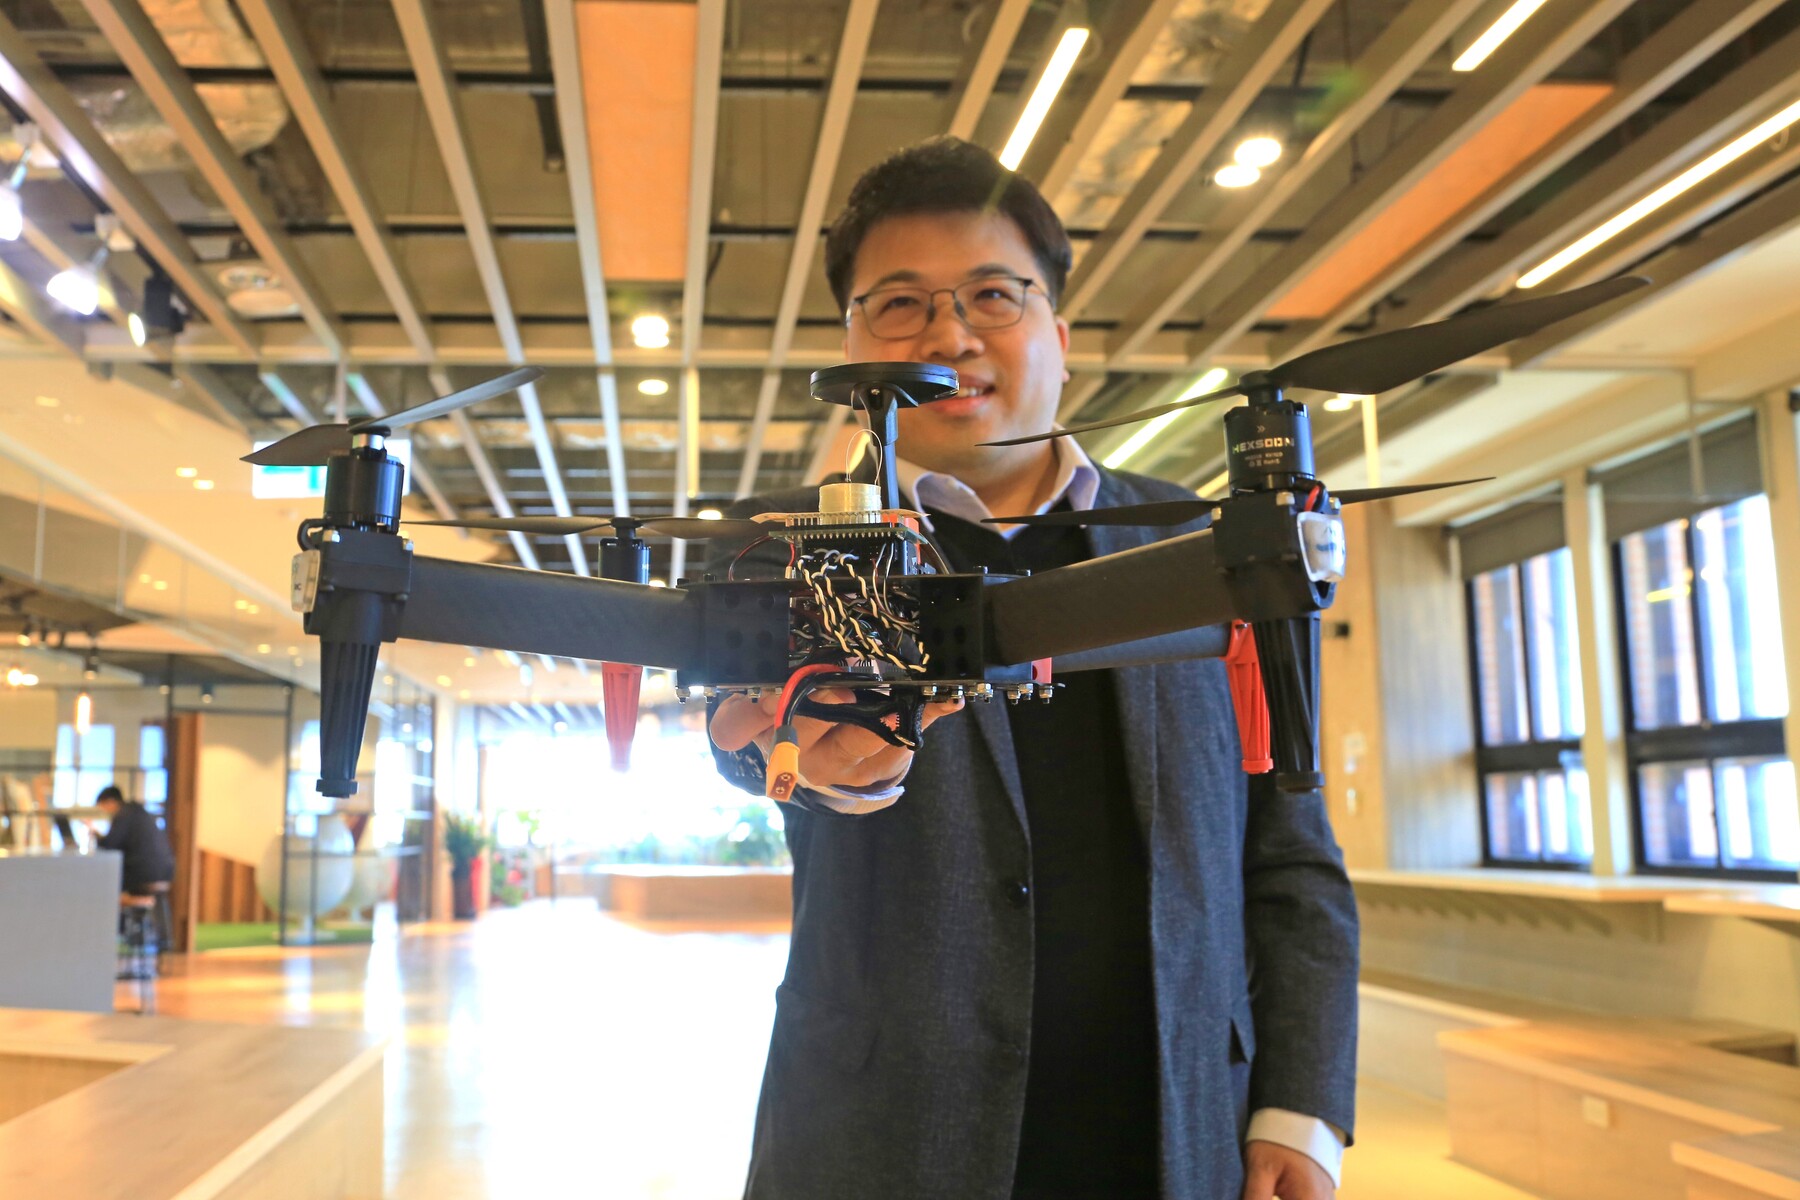 Professor Yung-Jr Hung of the Department of Photonics of NSYSU demonstrated the application of silicon photonics integrated circuits and fiber optic gyroscopes in drones.